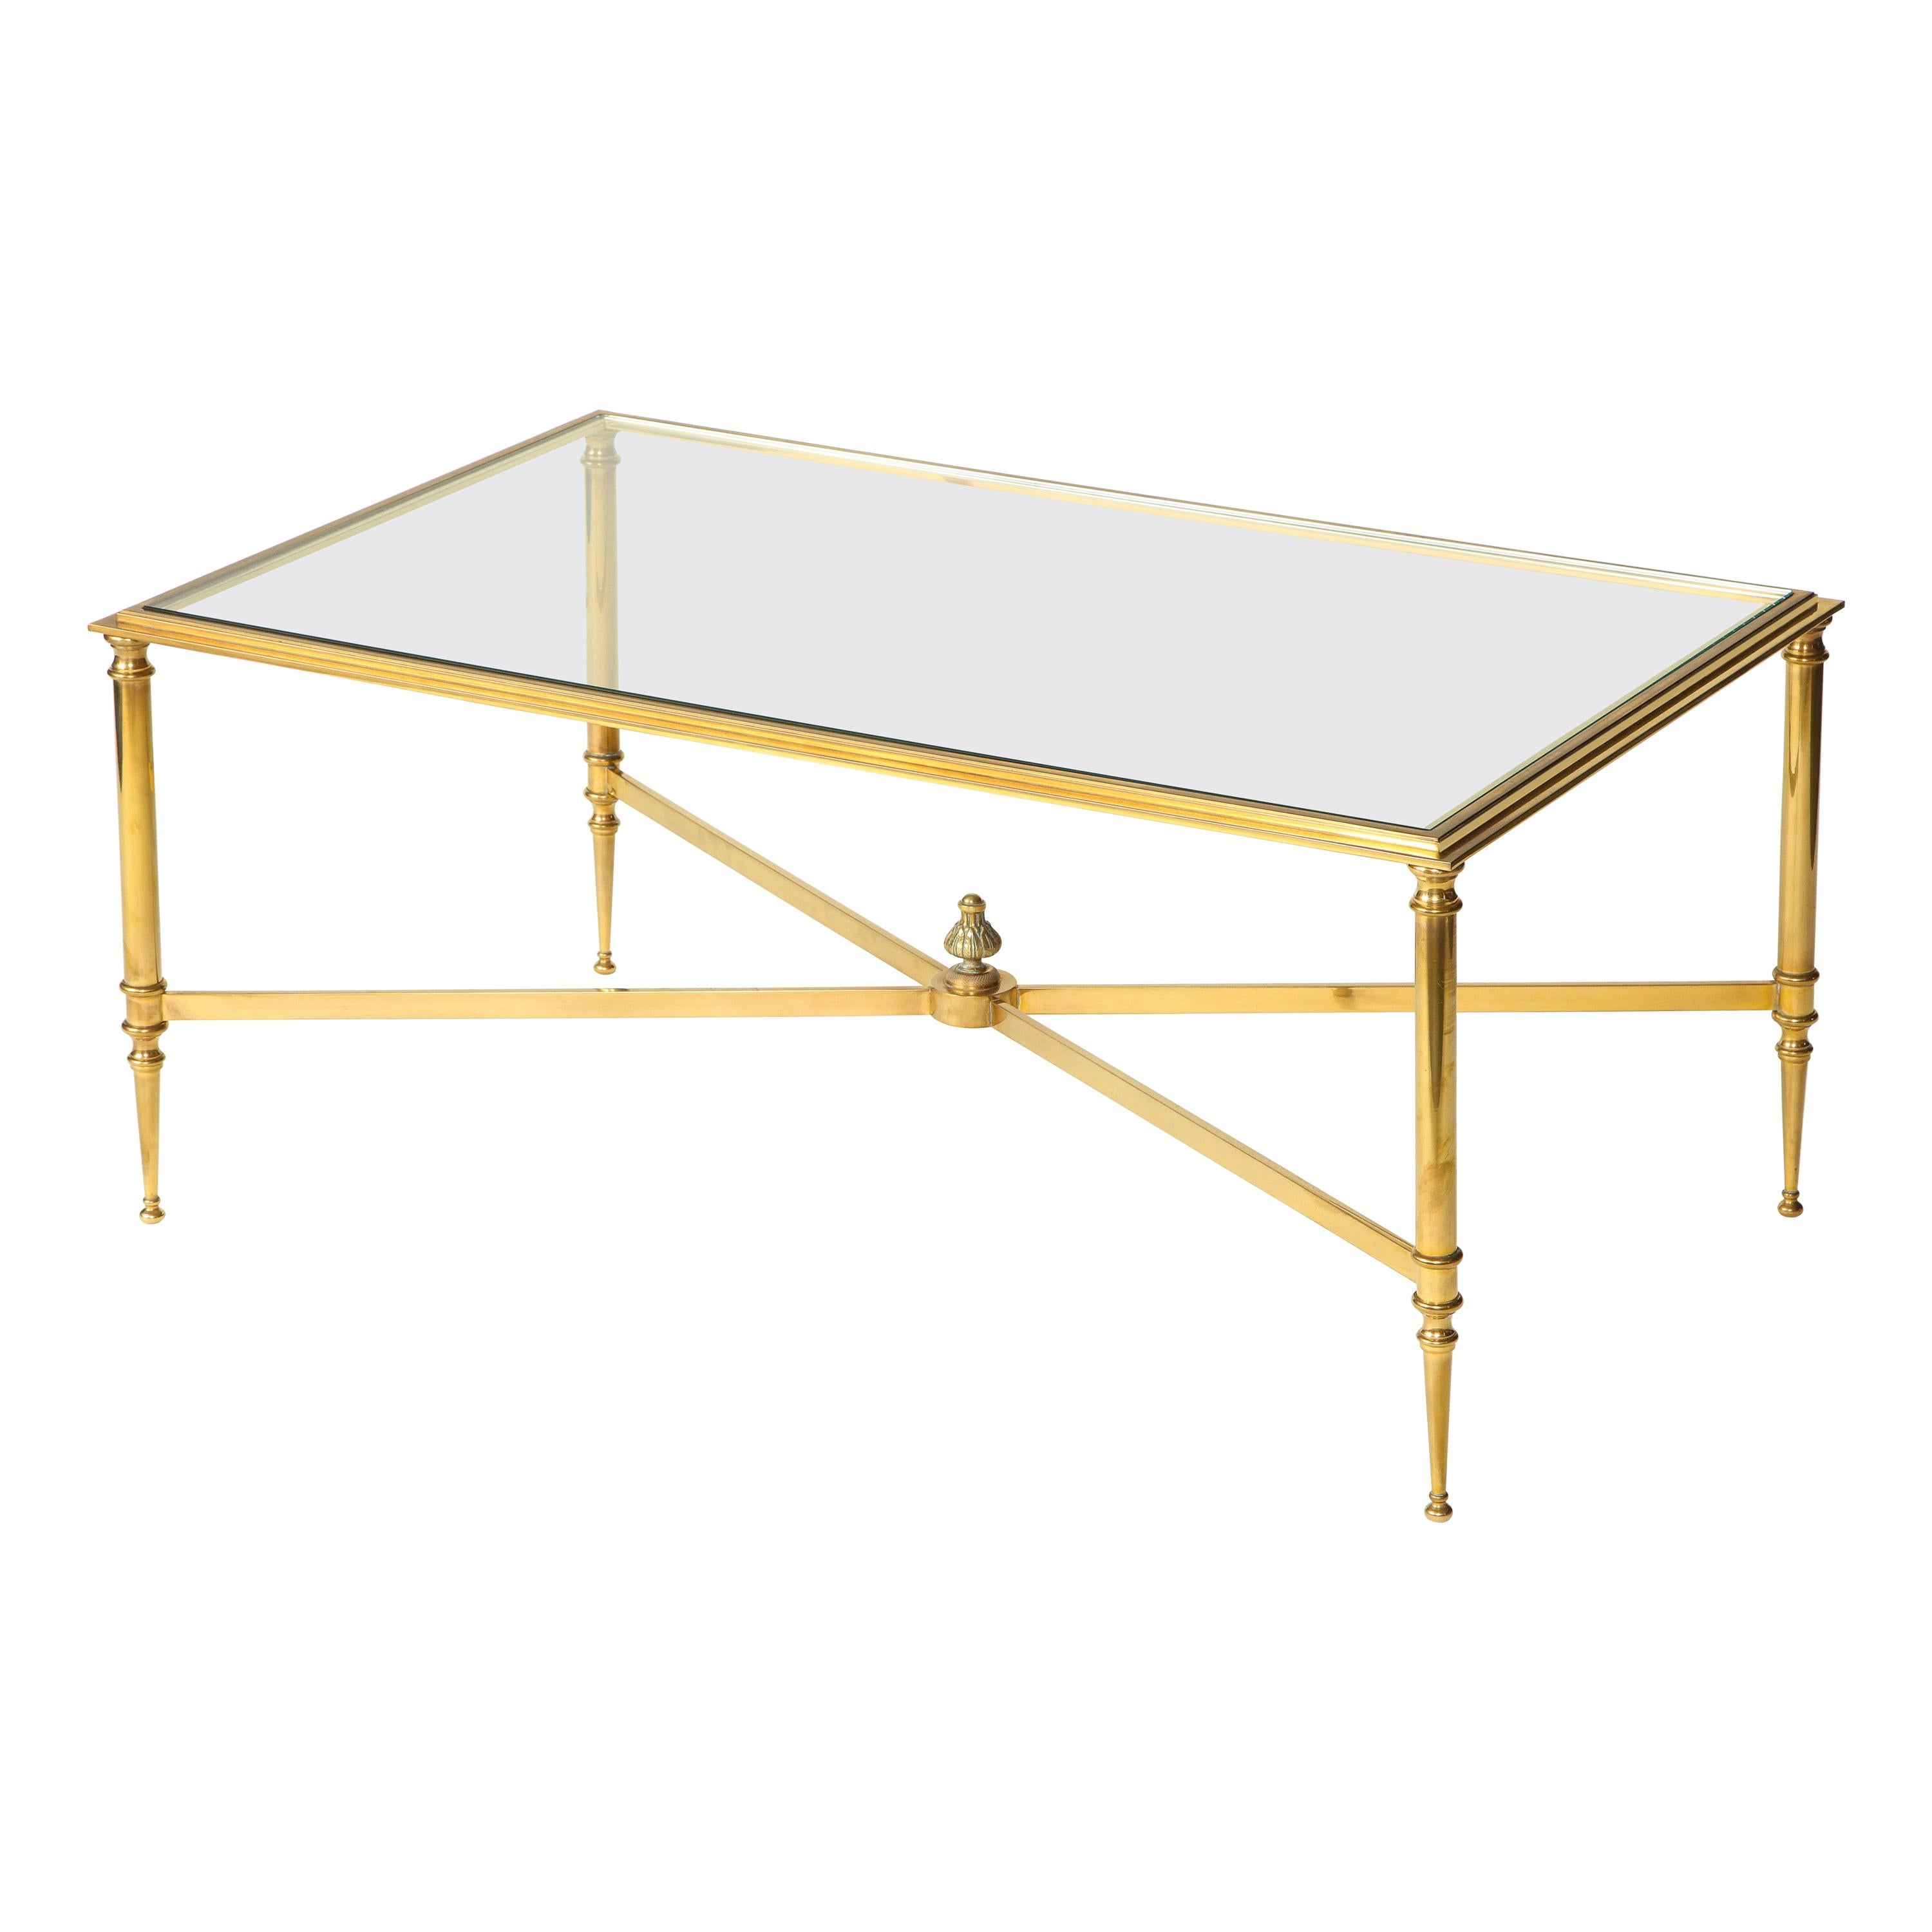 French Neoclassical Lacquered Brass and Glass Coffee Table